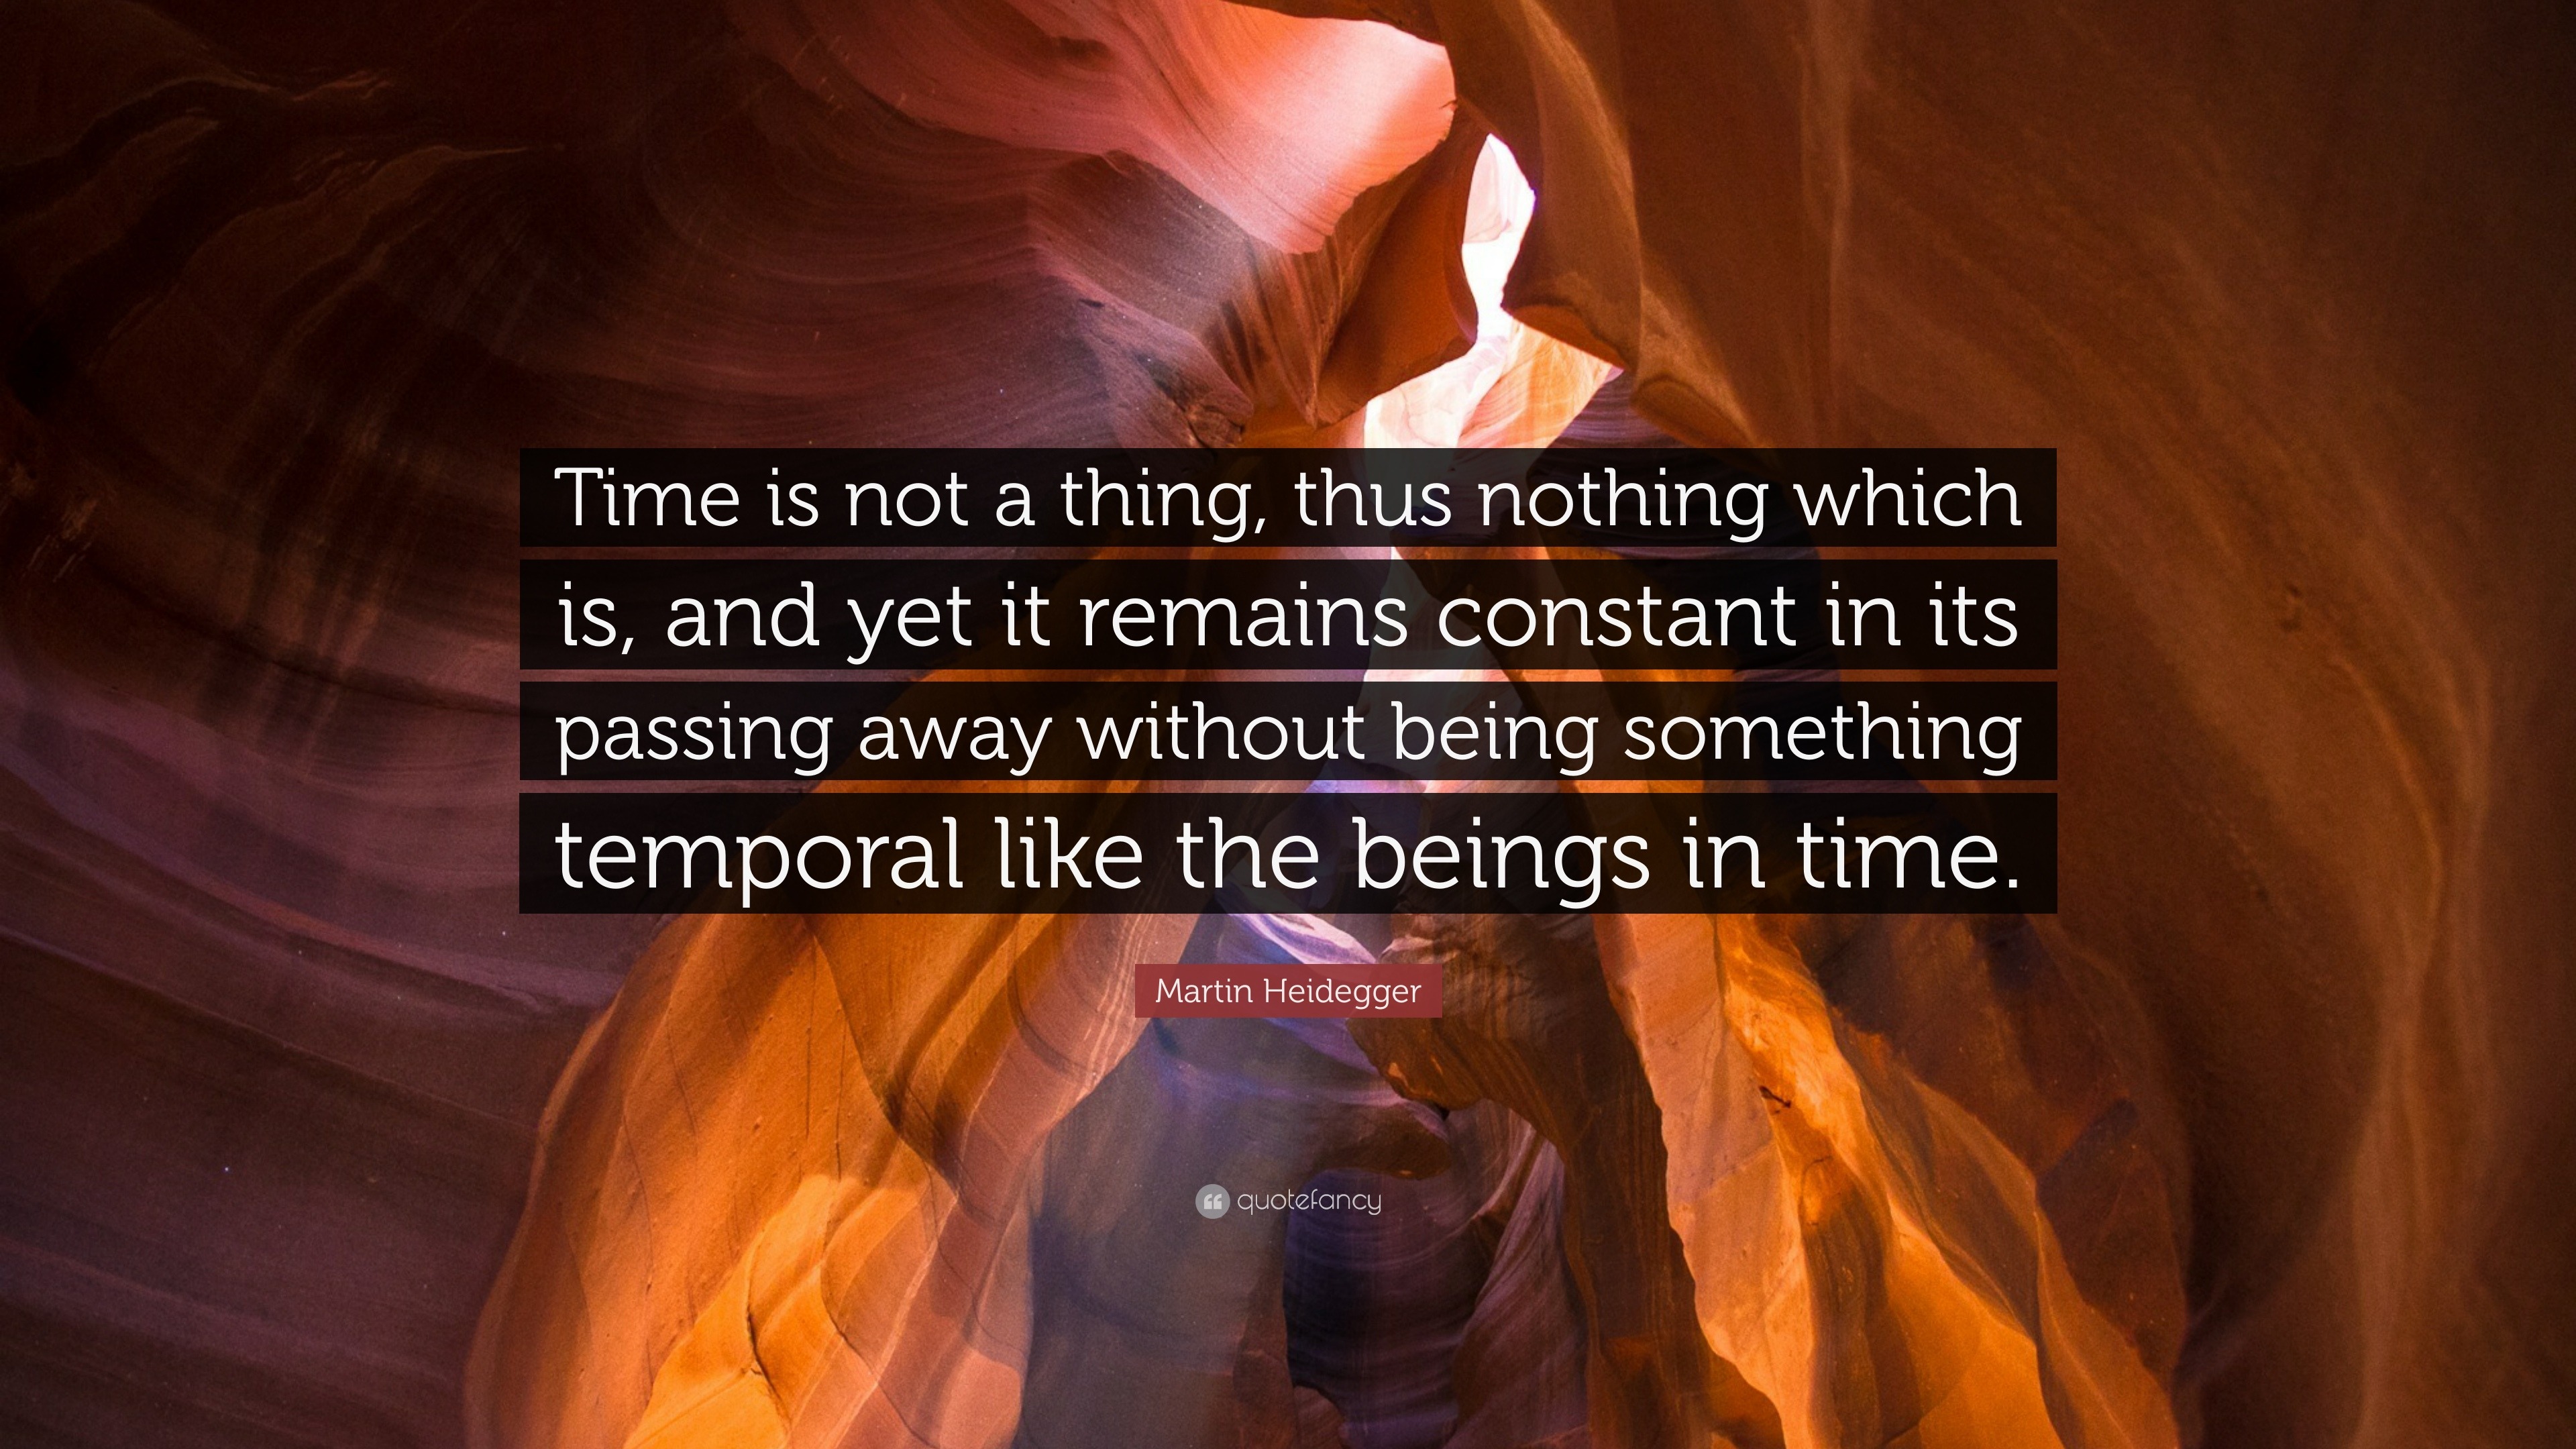 Martin Heidegger Quote Time Is Not A Thing Thus Nothing Which Is And Yet It Remains Constant In Its Passing Away Without Being Something Temp